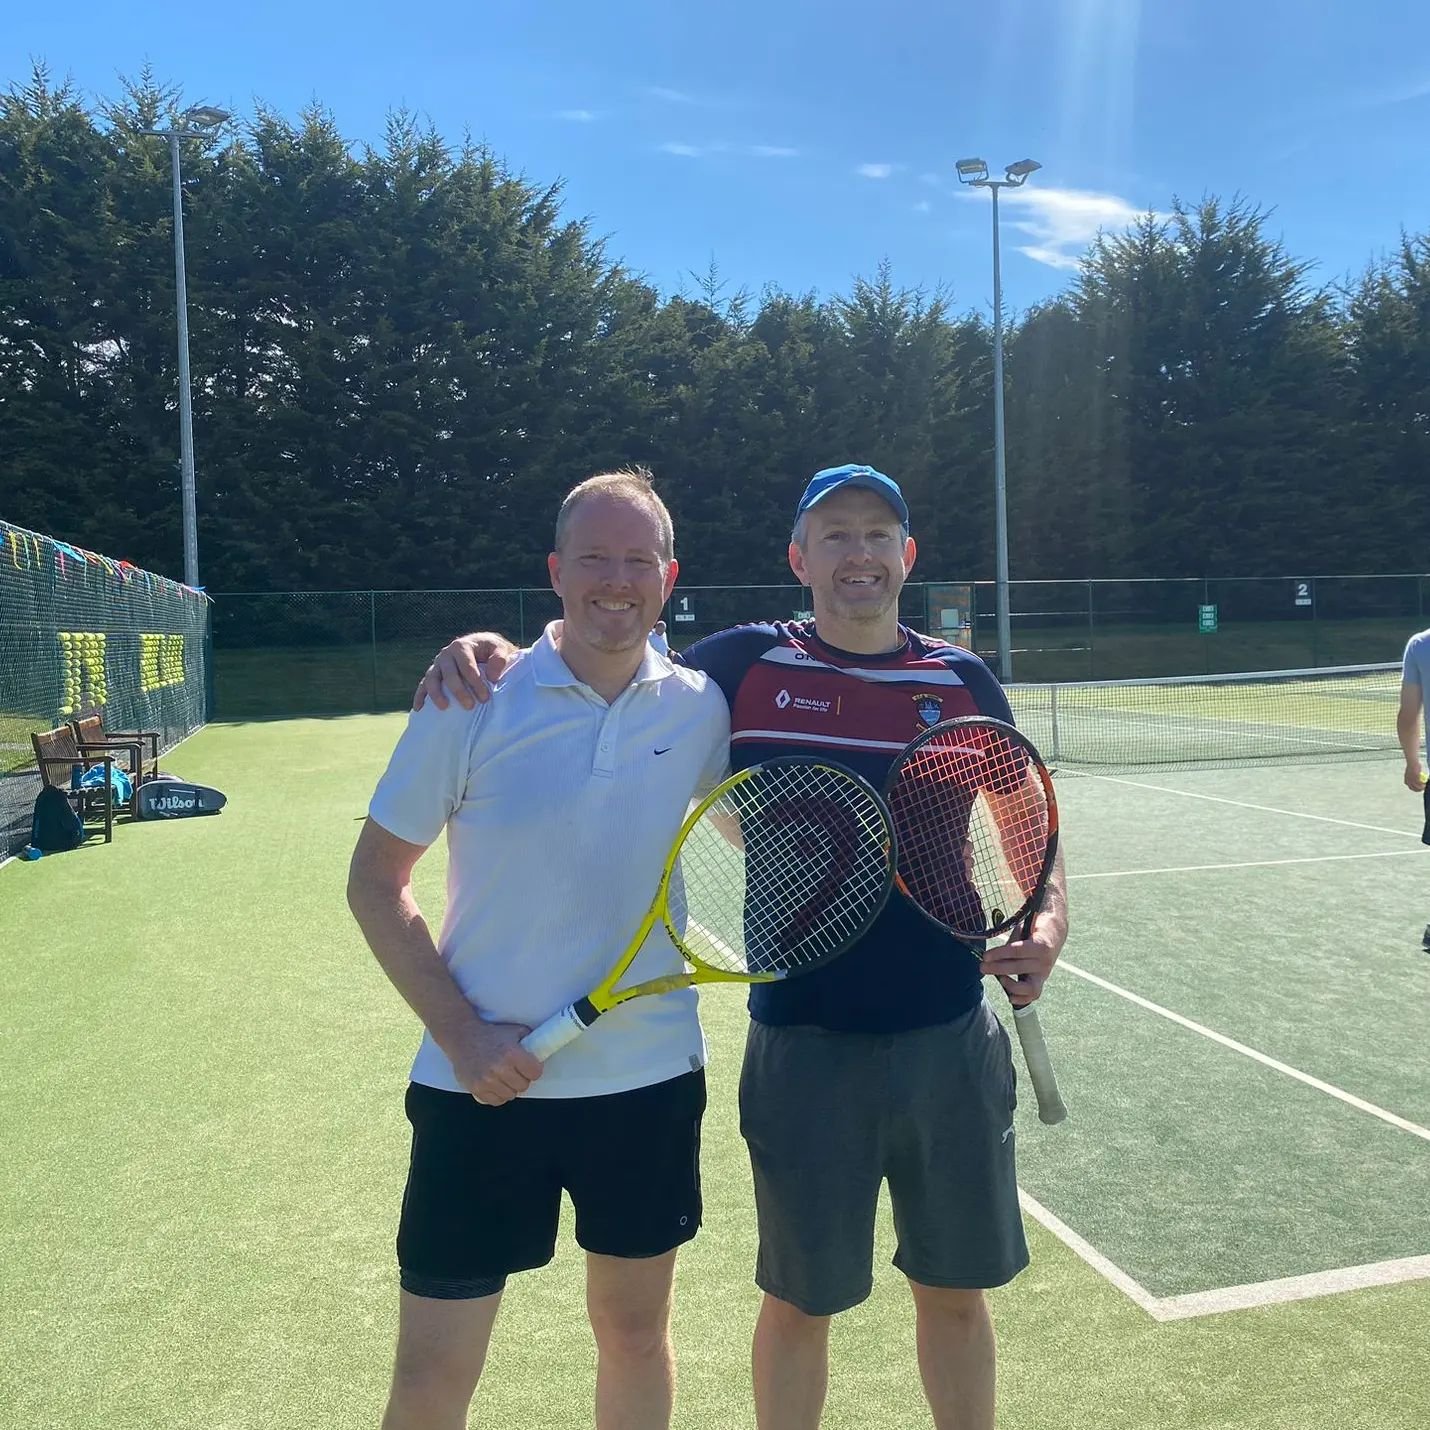 The two Bs (Bernard and Brendan 🙂) are in the finals of the Donabate Portrane Open tomorrow, Monday, at 16.15 👏👏👏 come on down to support! @donabate_tennis